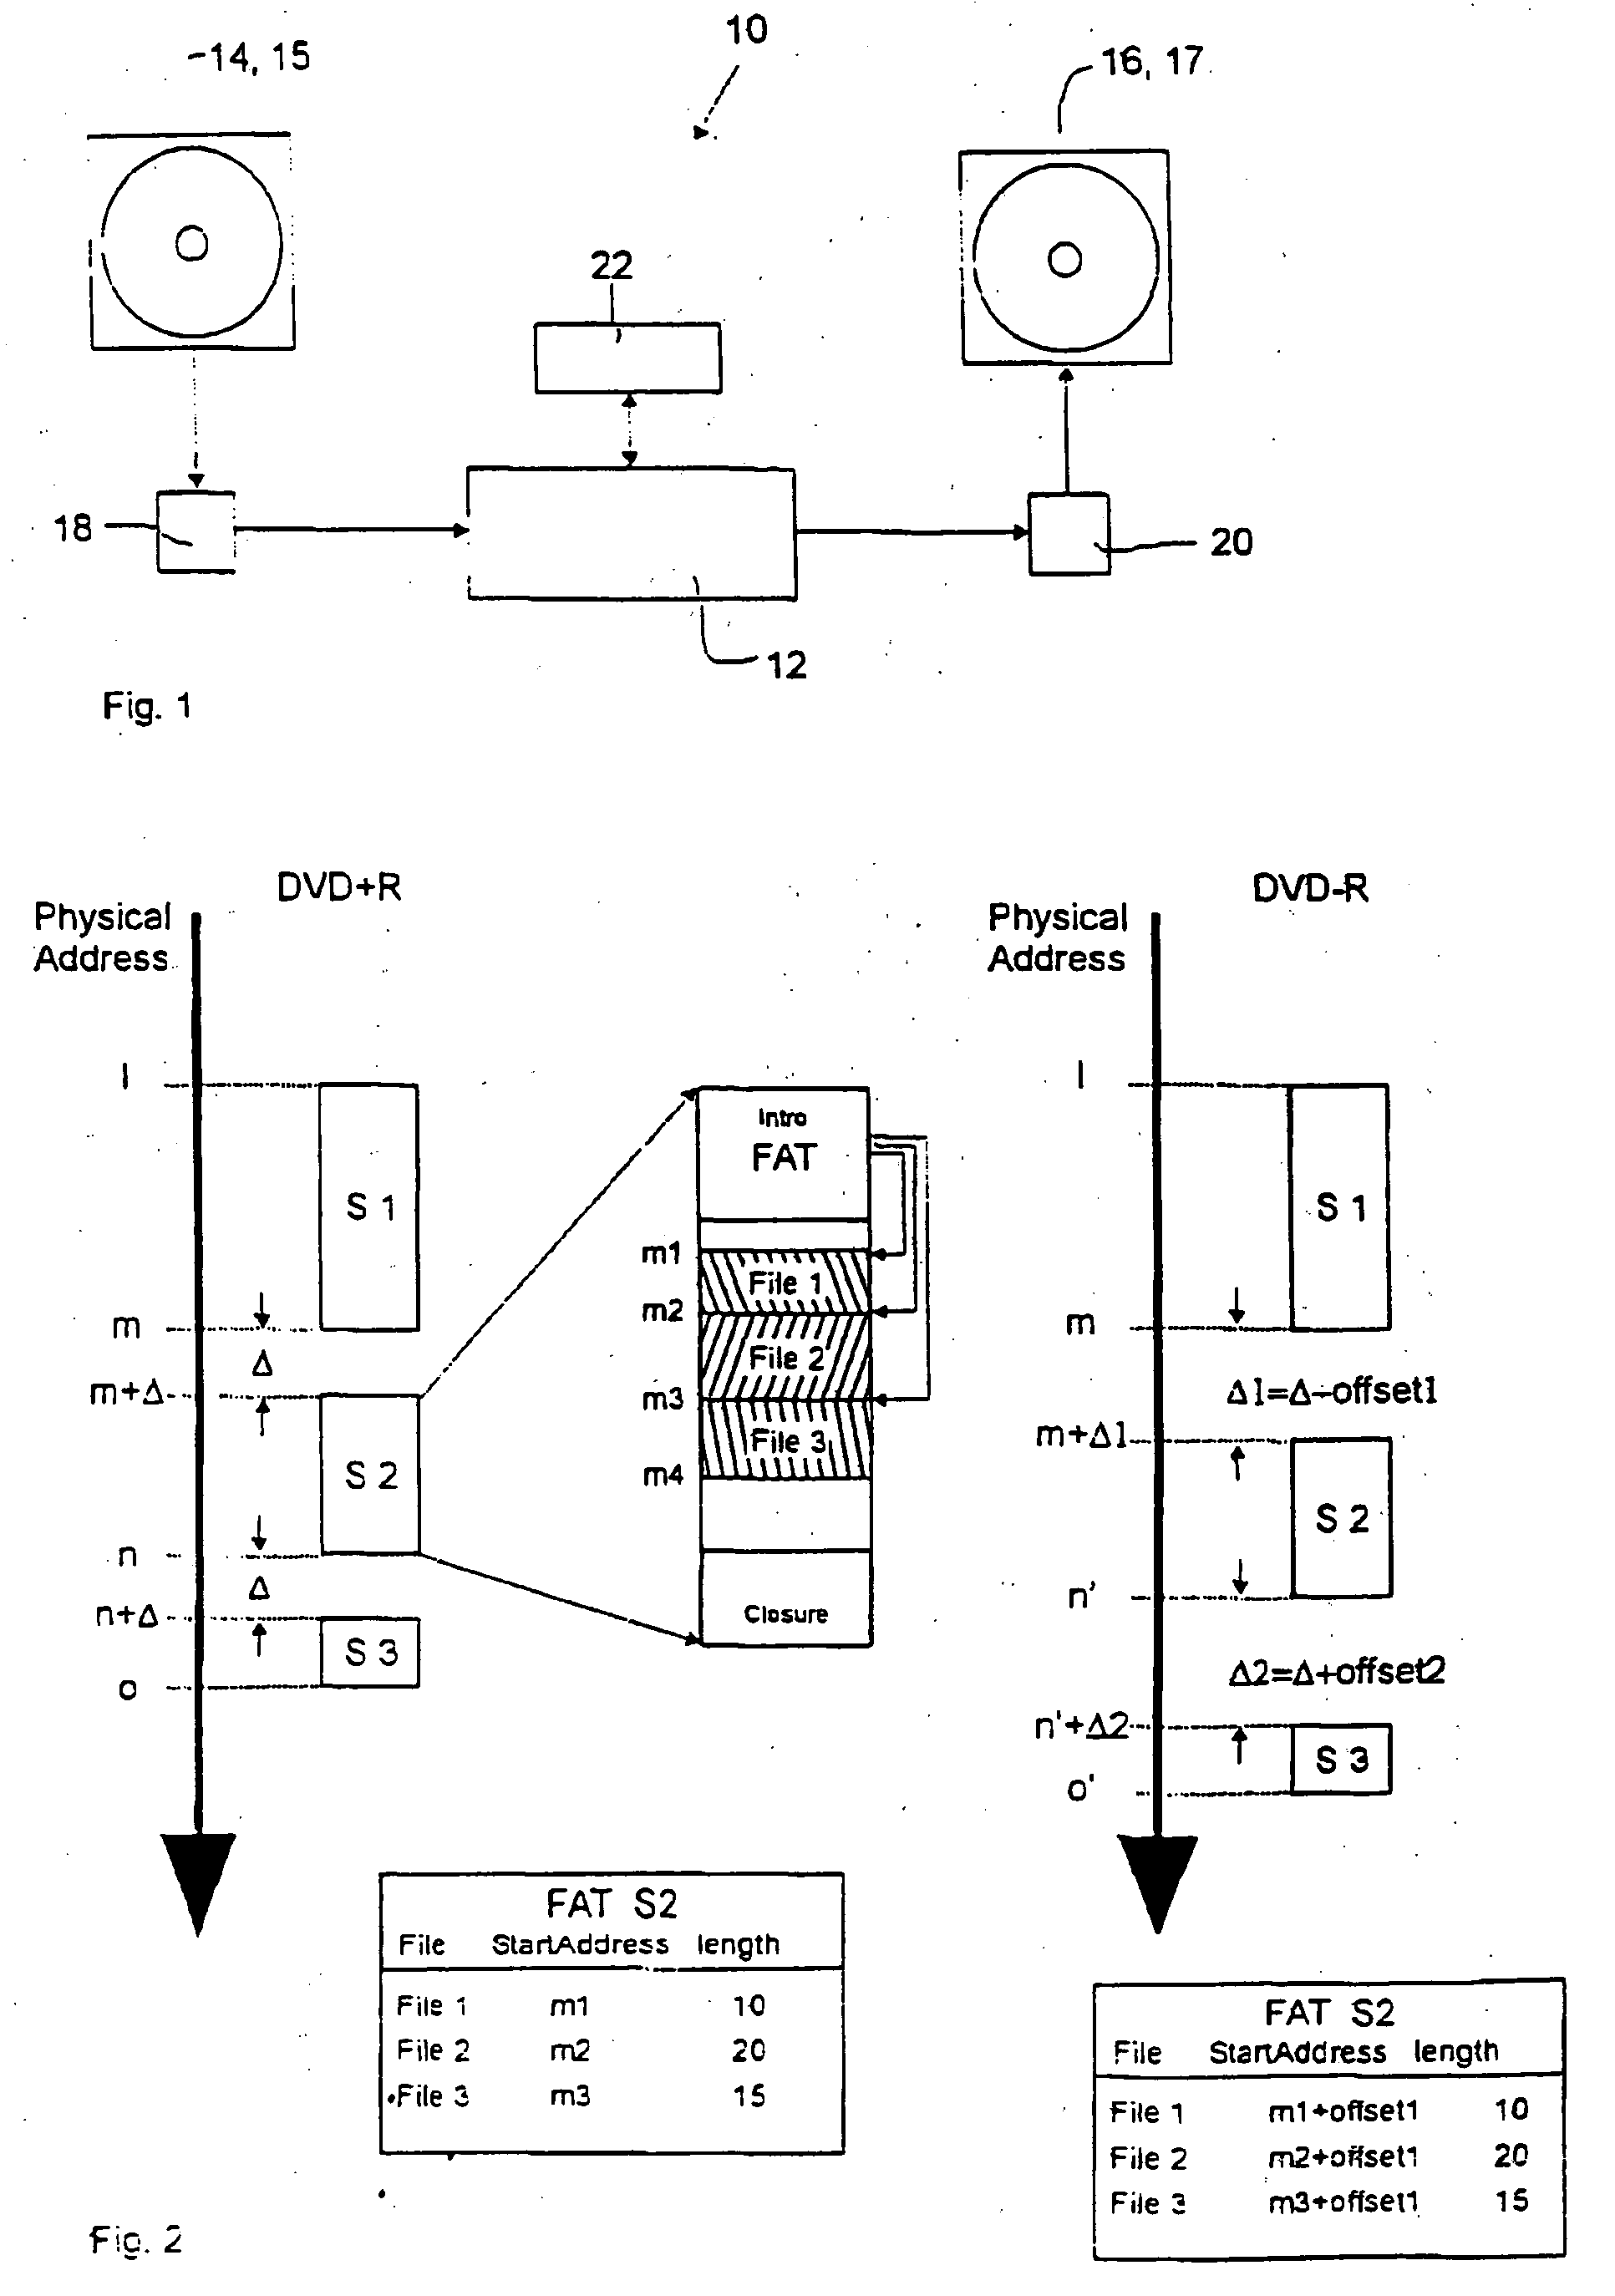 Apparatus and method for copying data